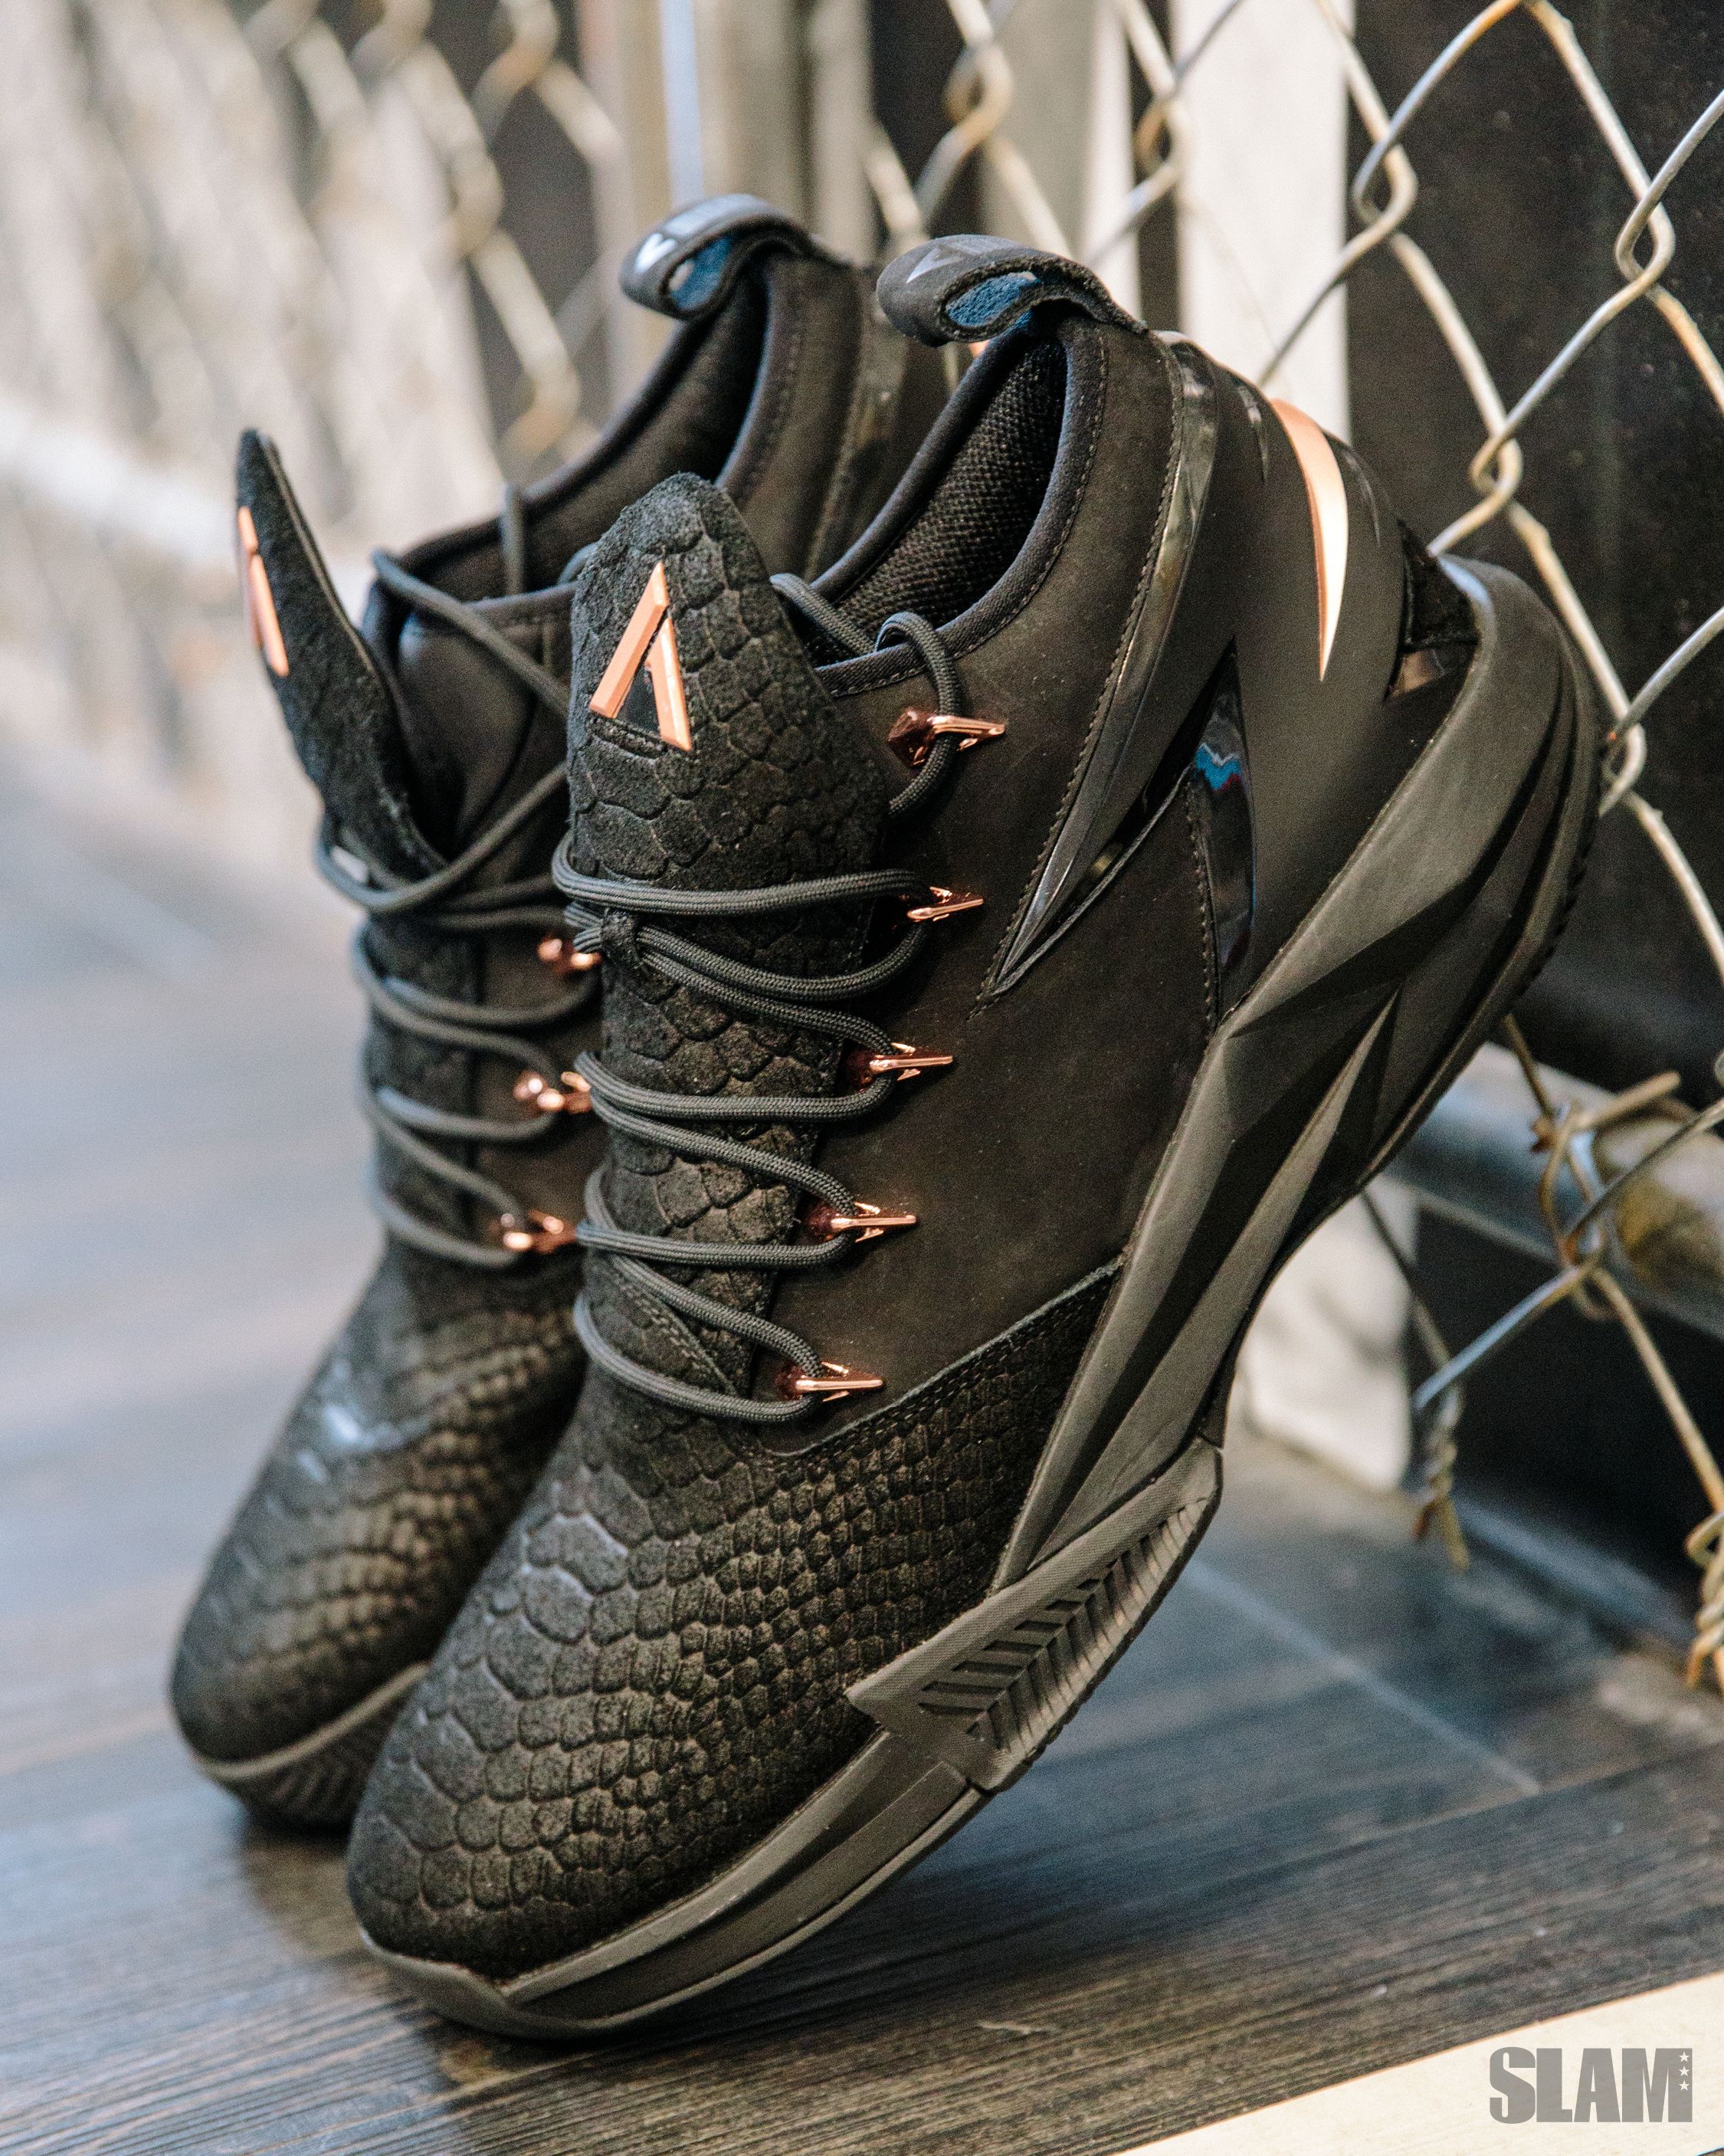 And1 Rereleases Tai Chi Shoes, Kevin Garnett Talks Plans for Future –  Footwear News